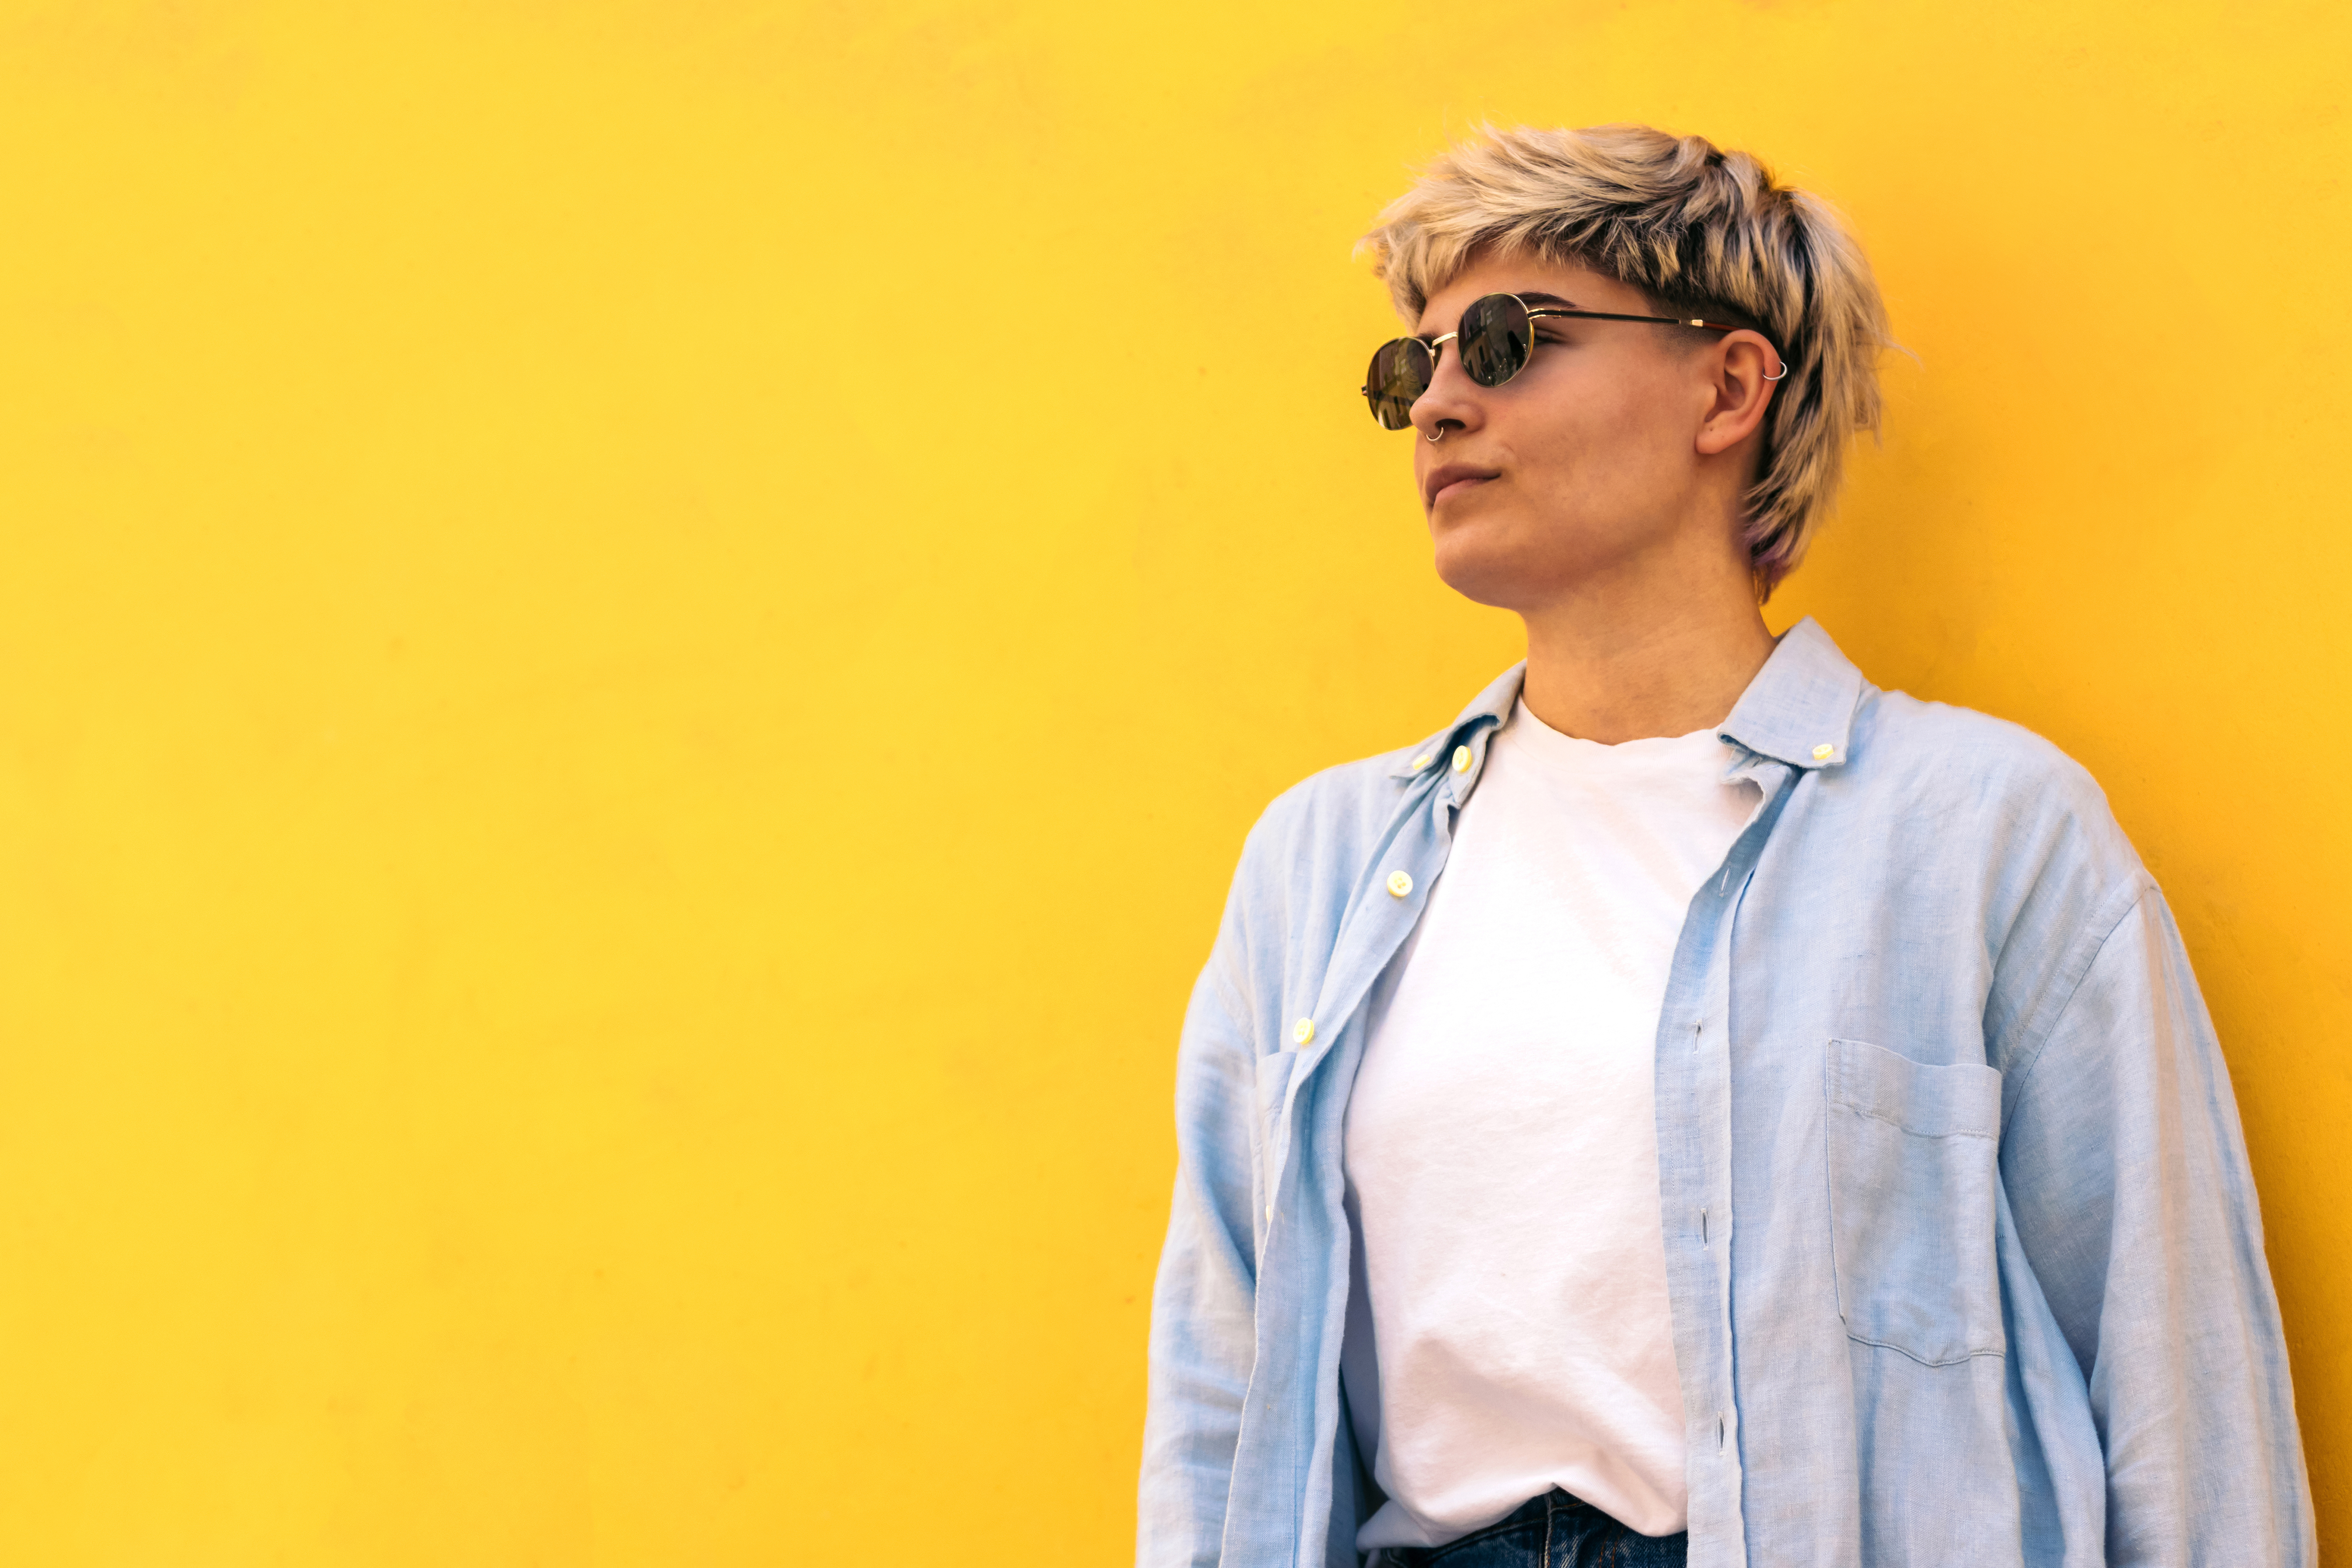 Woman wearing sunglasses and casual shirt standing by a yellow wall, looking to the side